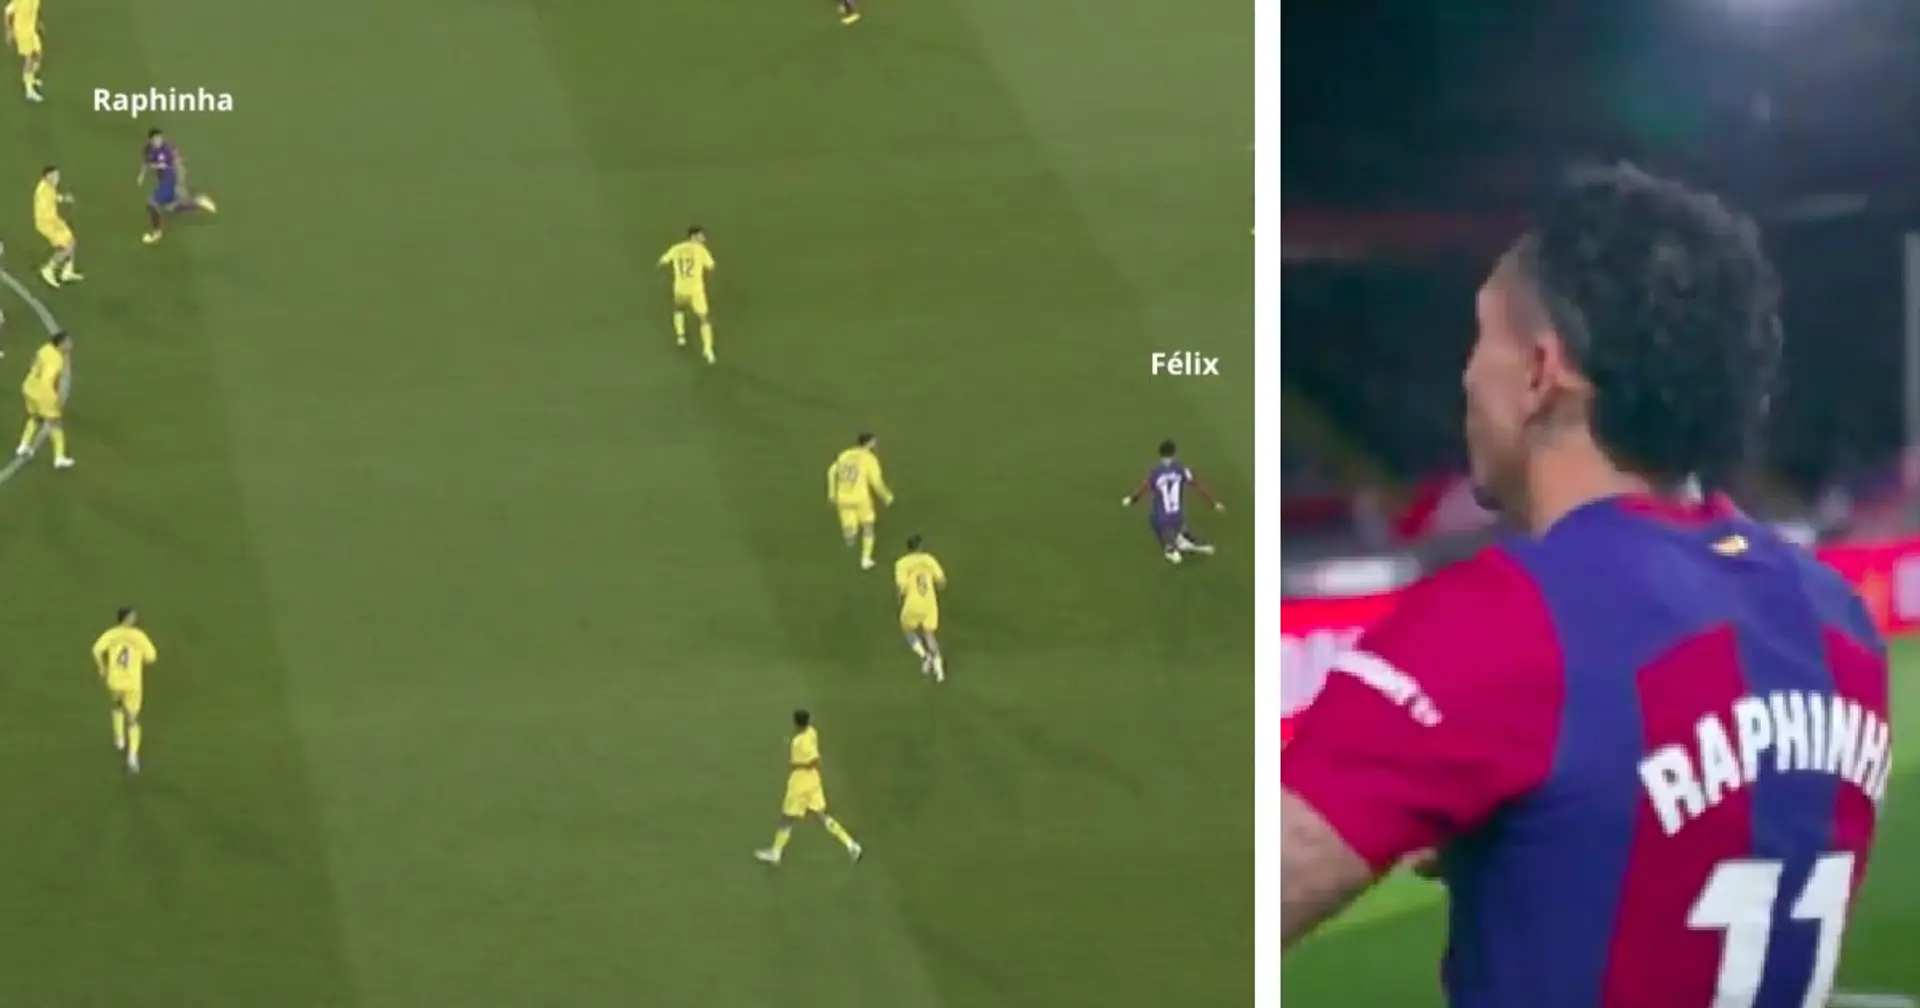 Magical: Joao Felix's beautiful assist for Raphinha's goal - spotted